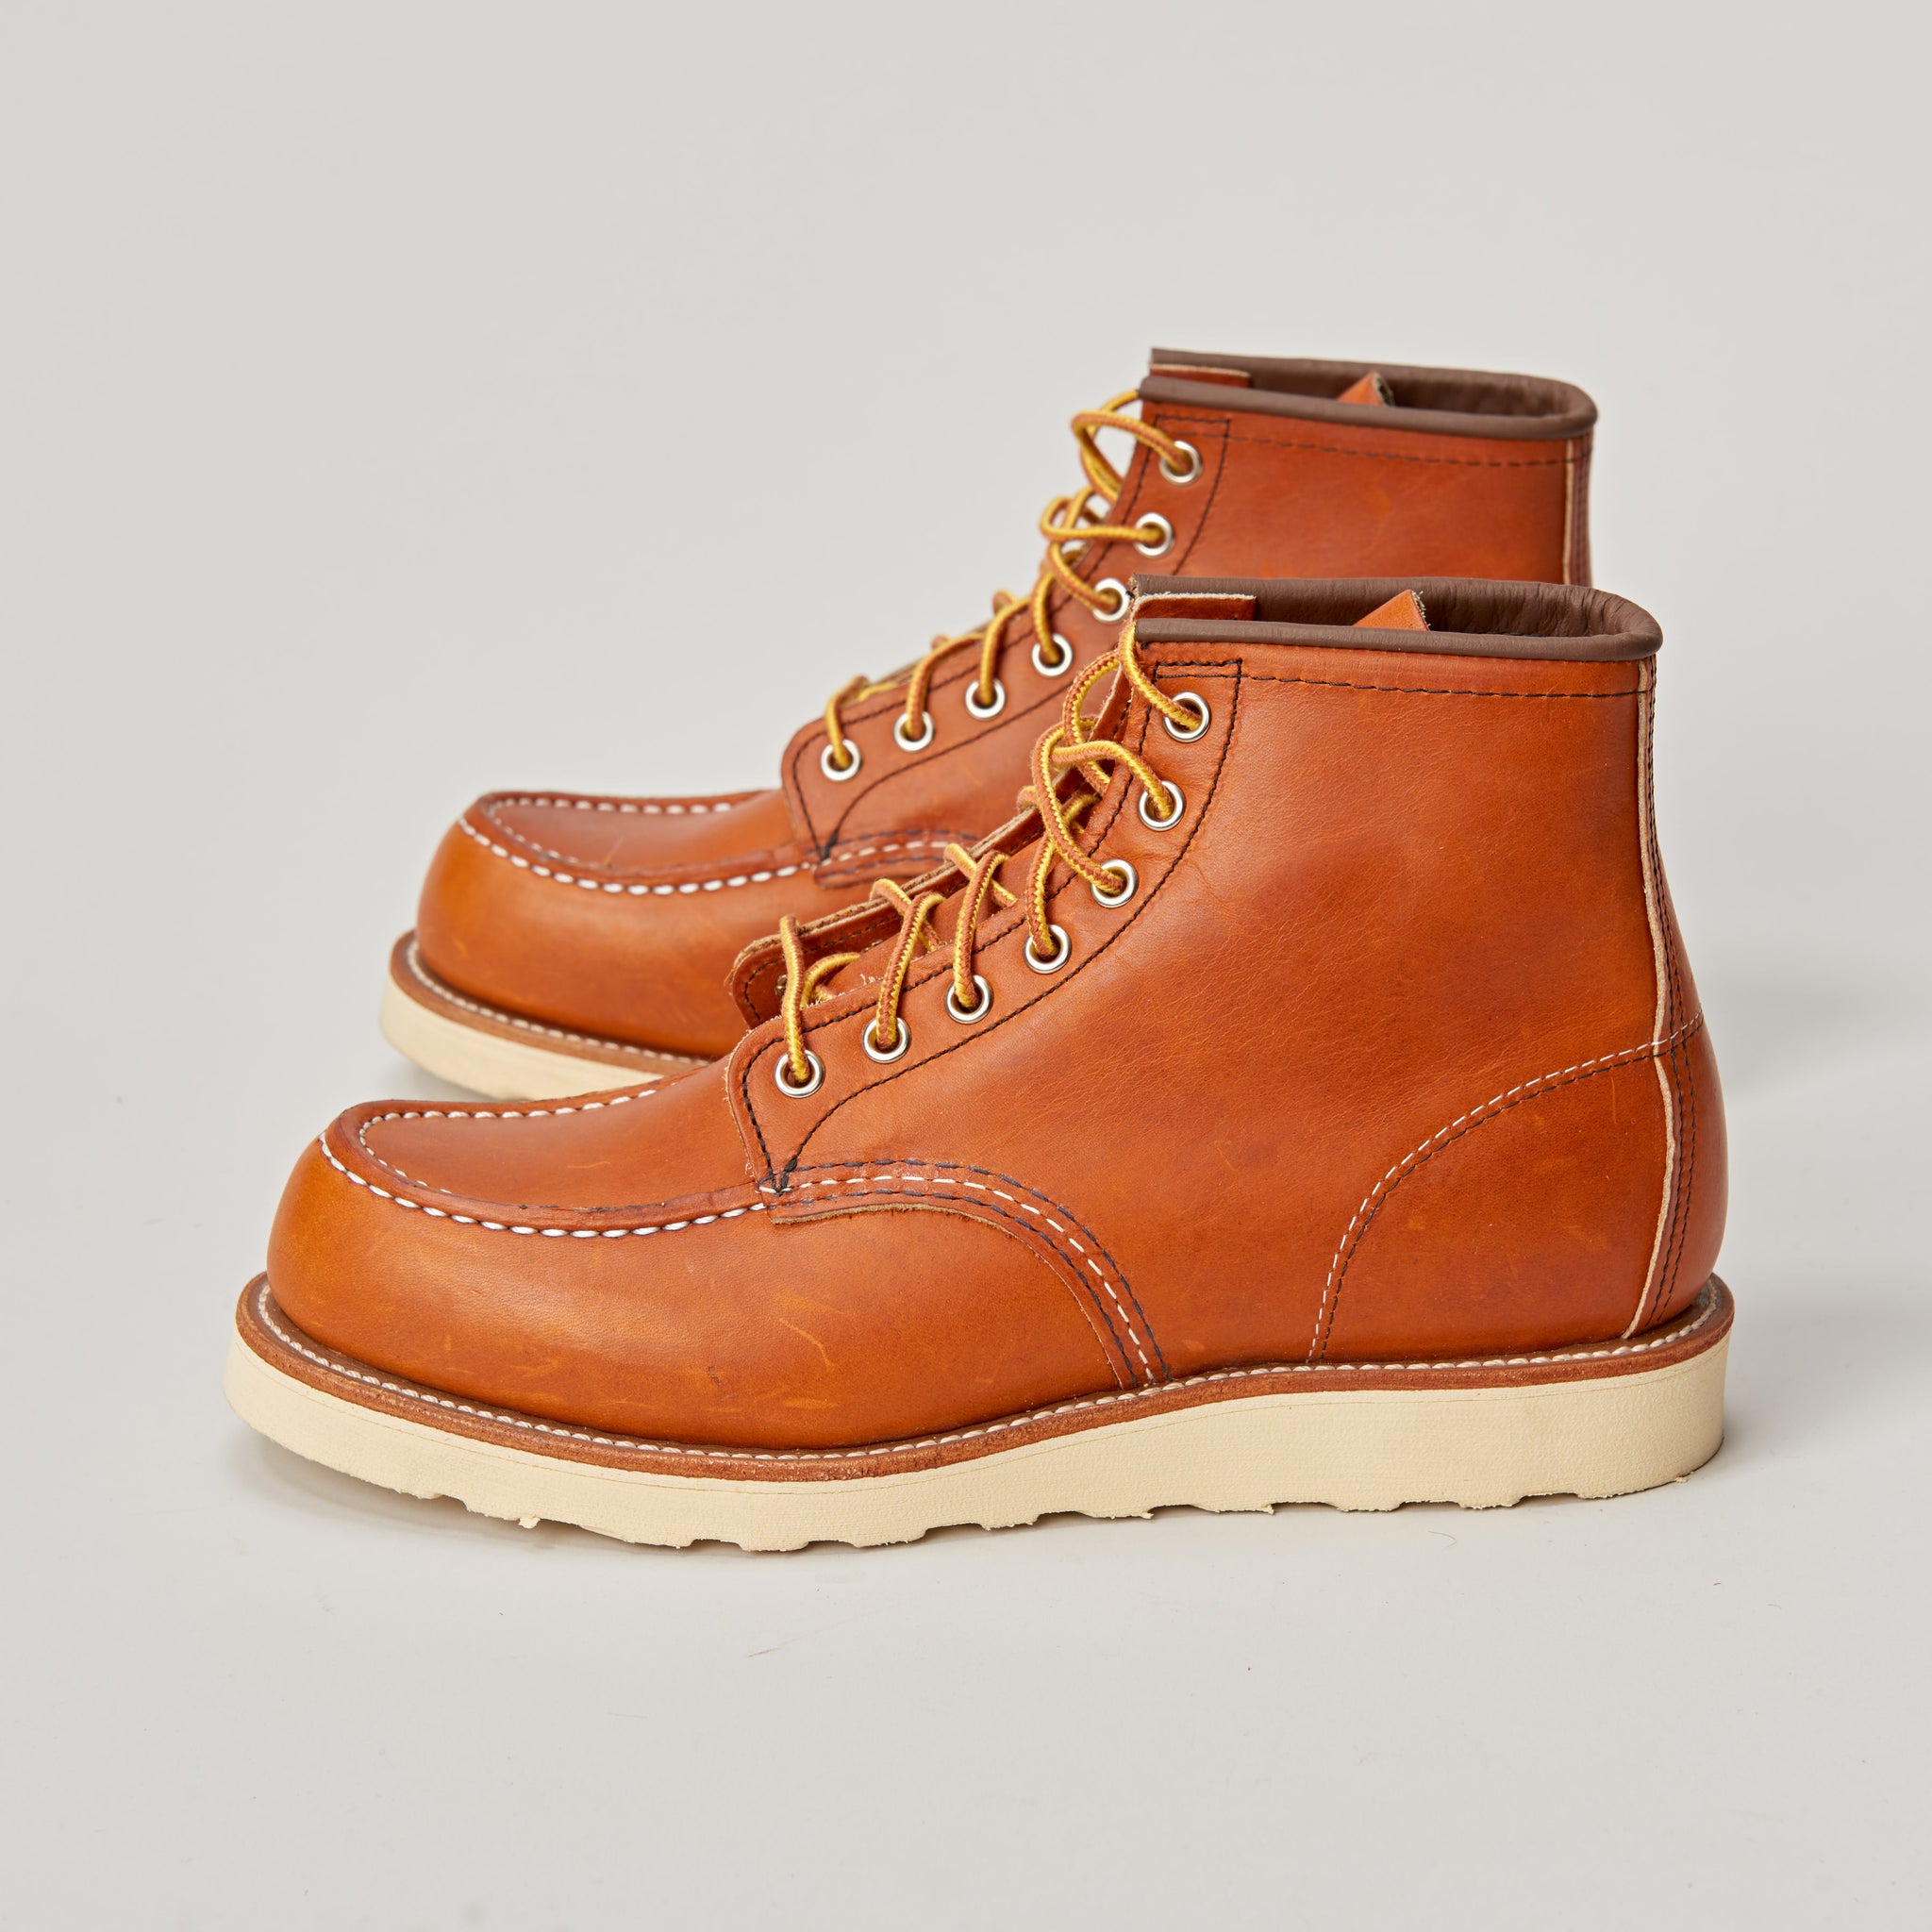 red wing 875